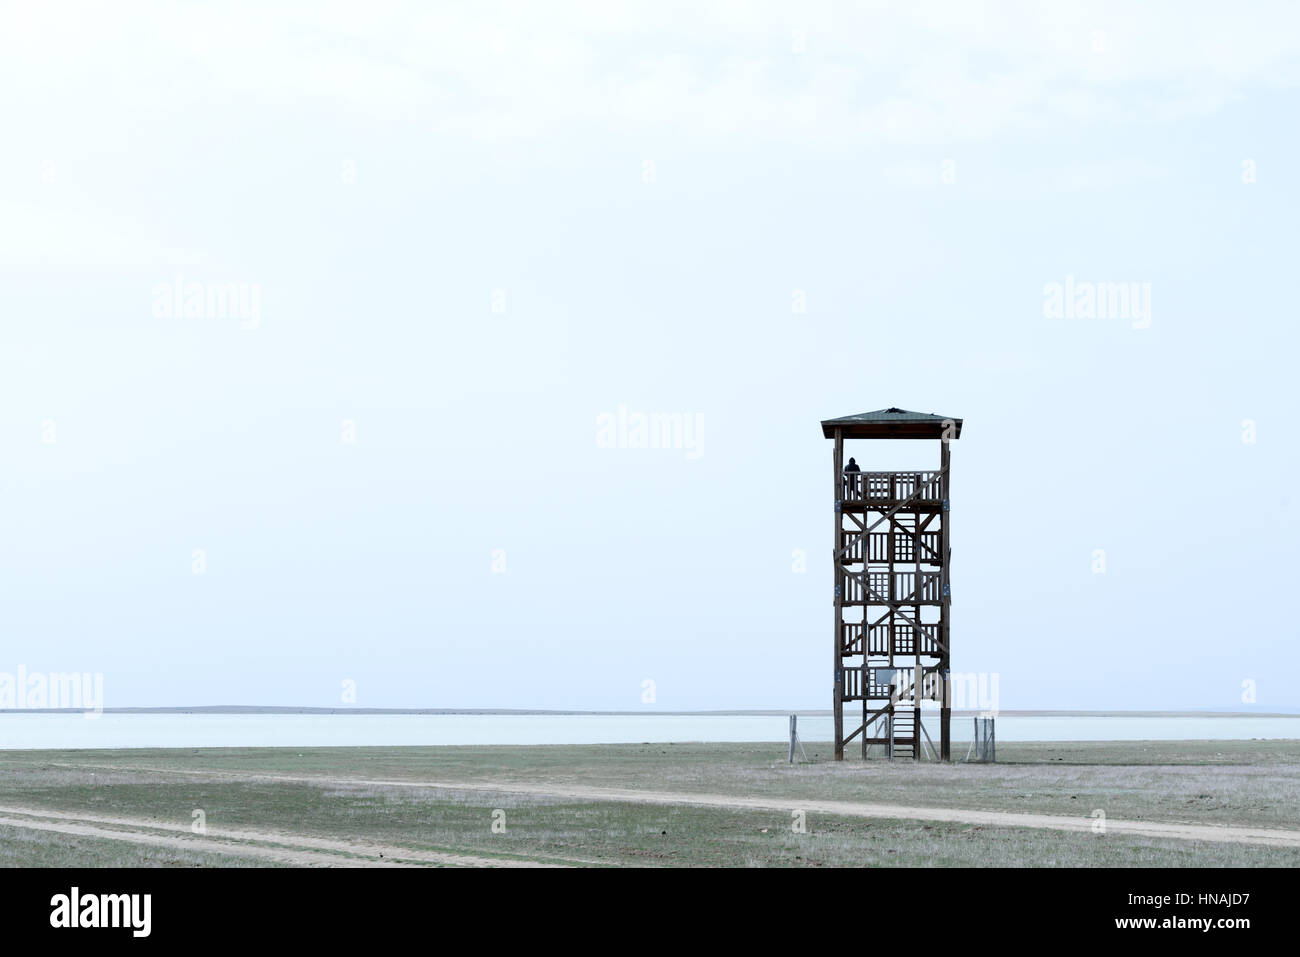 Alone observant tower and silhouette of man Stock Photo